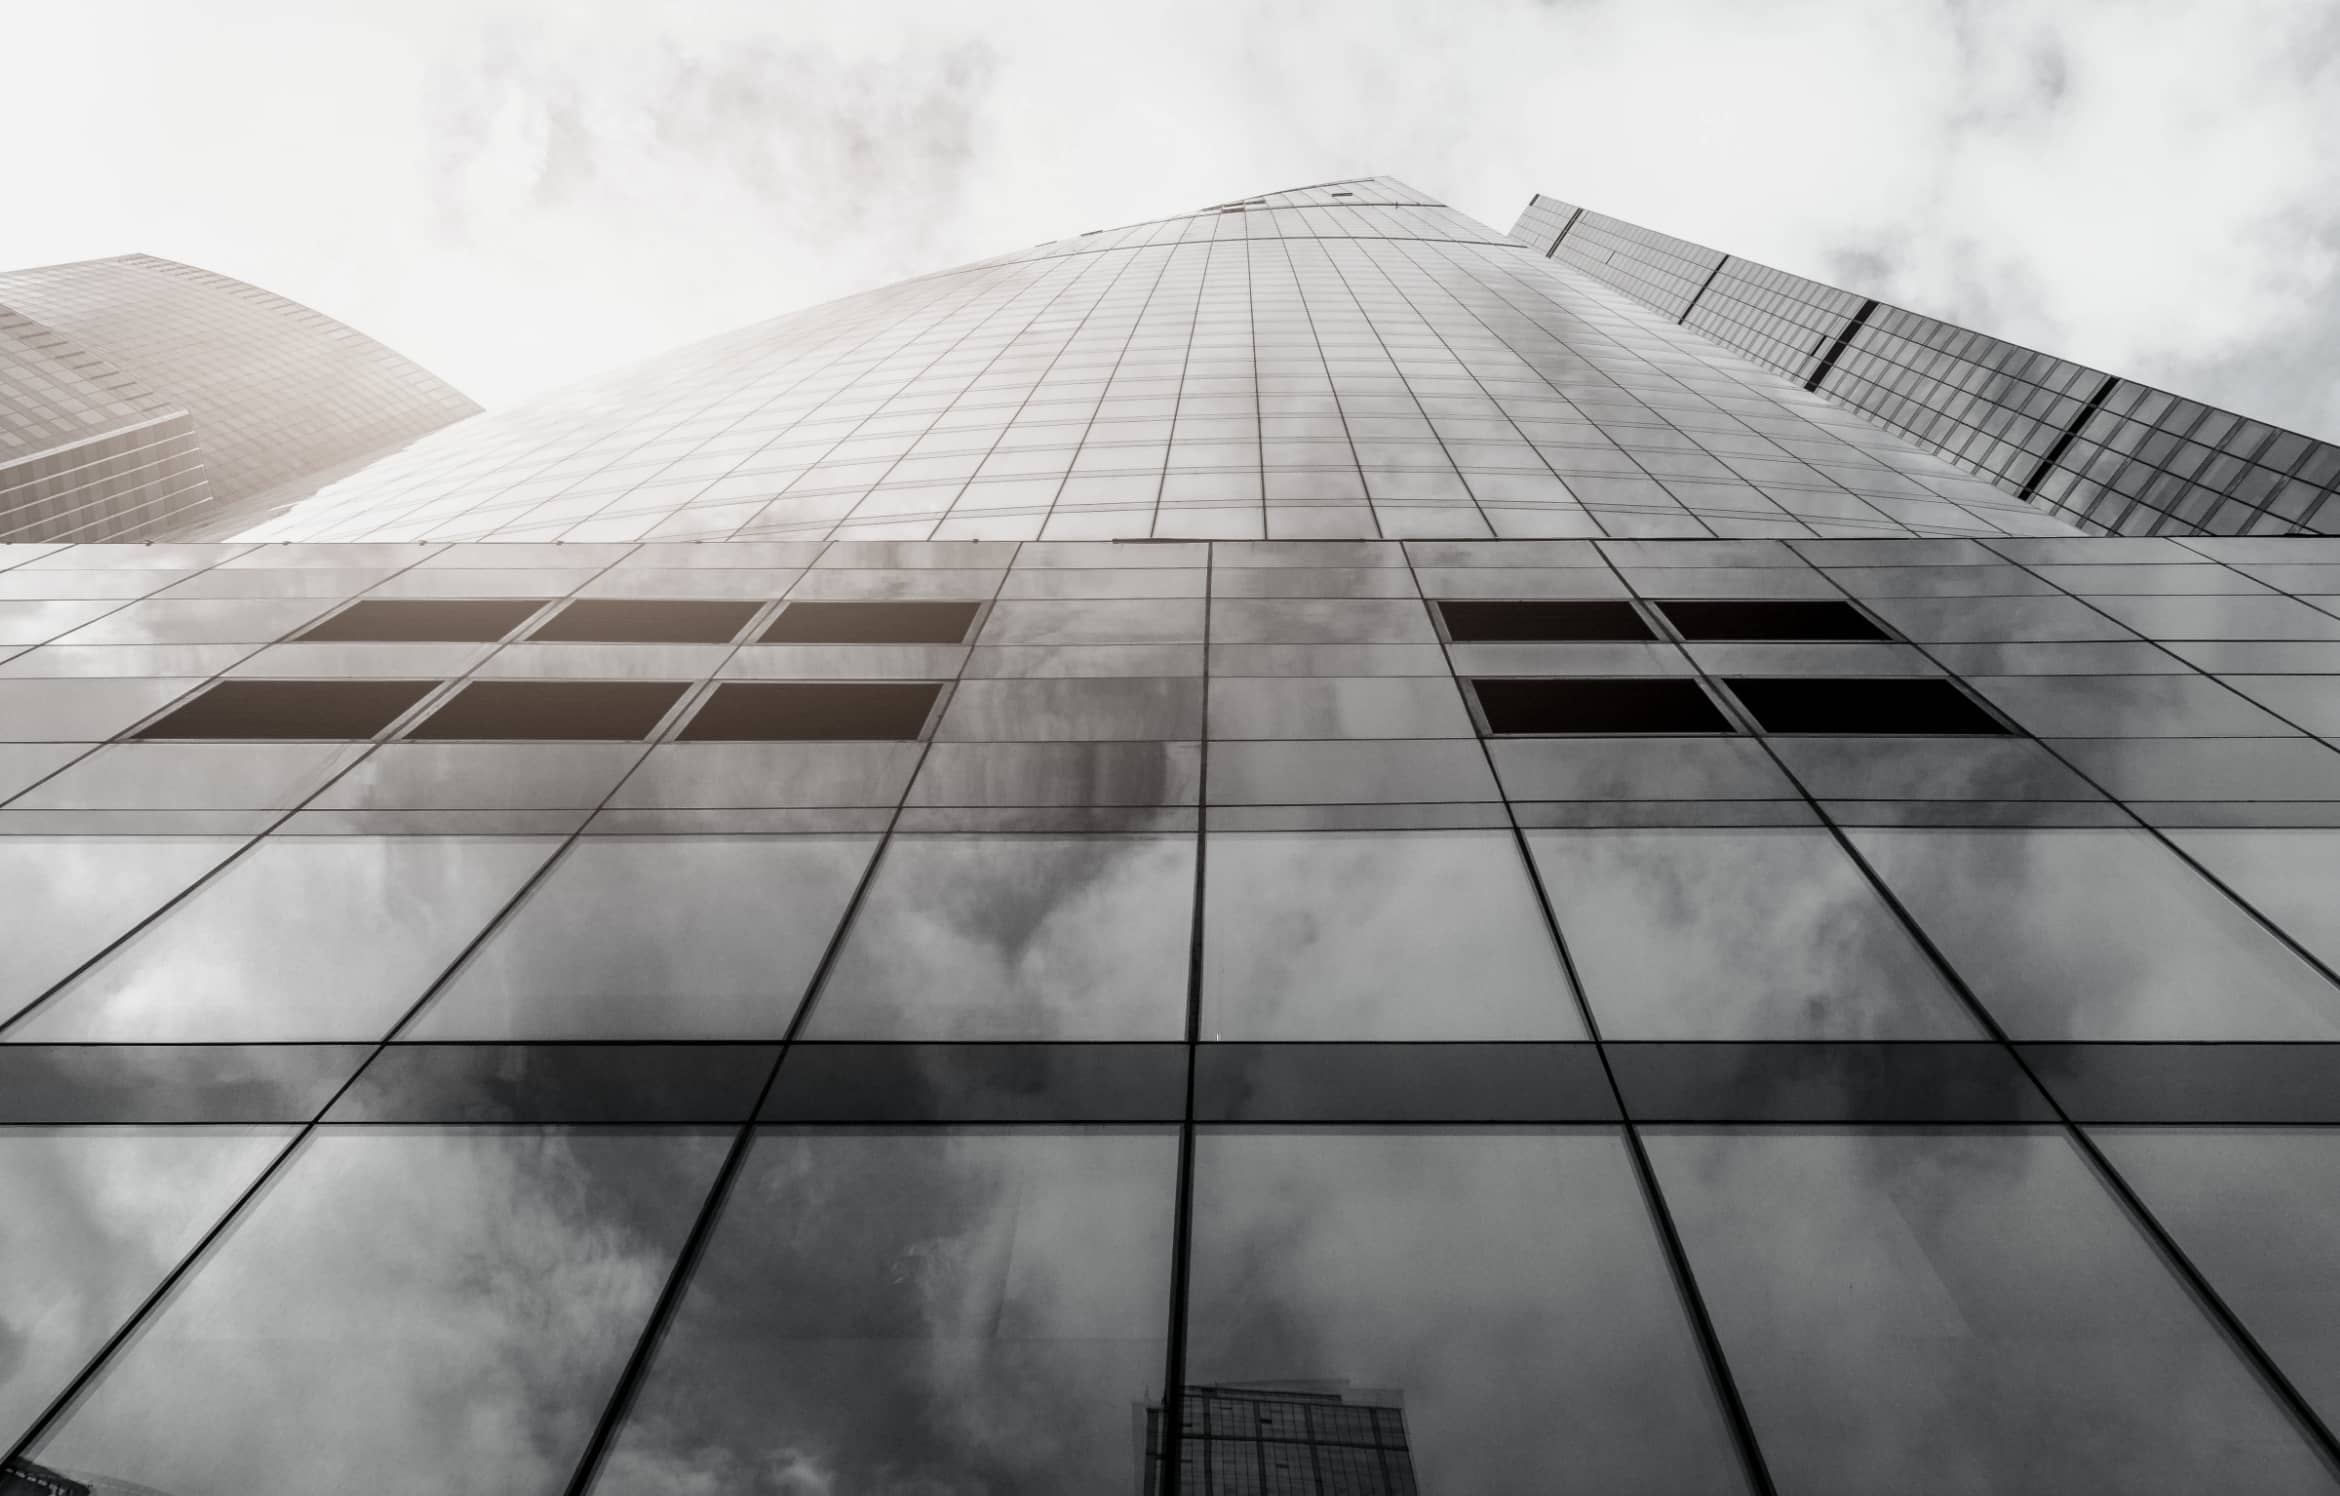 An upwards view of a glass high rise building with a cloudy sky